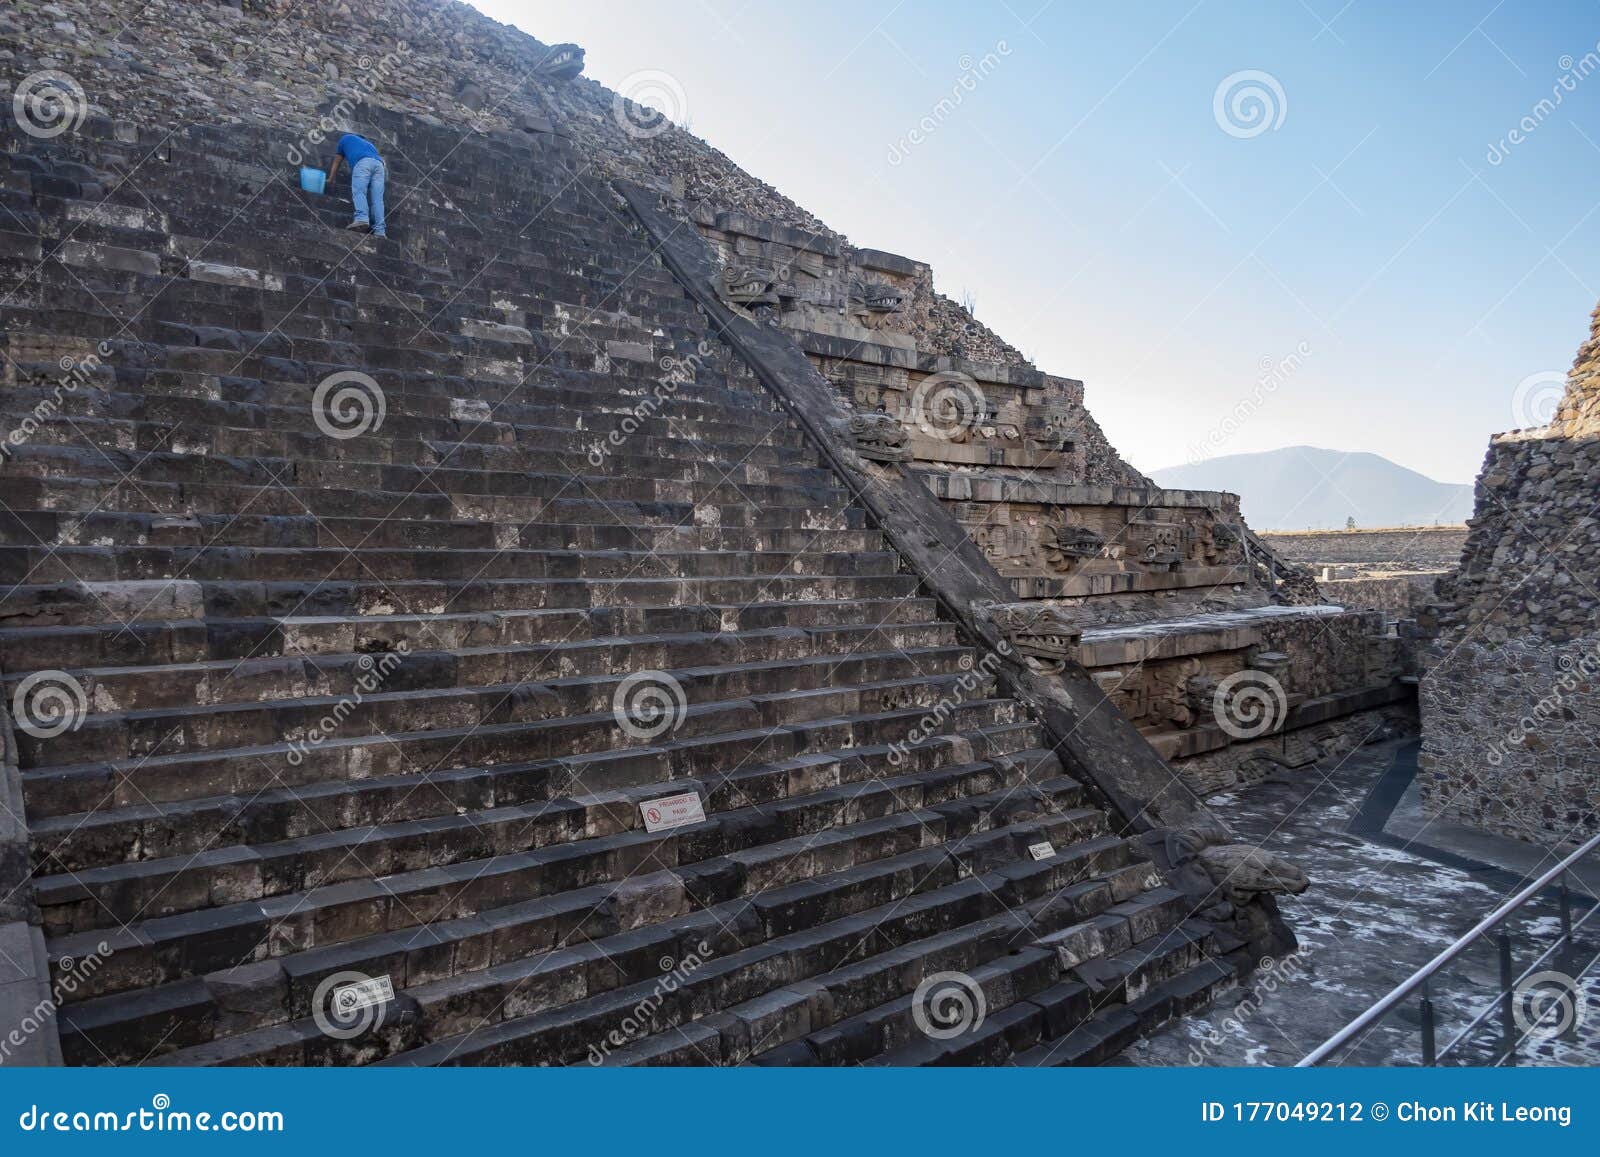 The Famous Feathered Serpent Pyramid Stock Photo - Image of historic ...